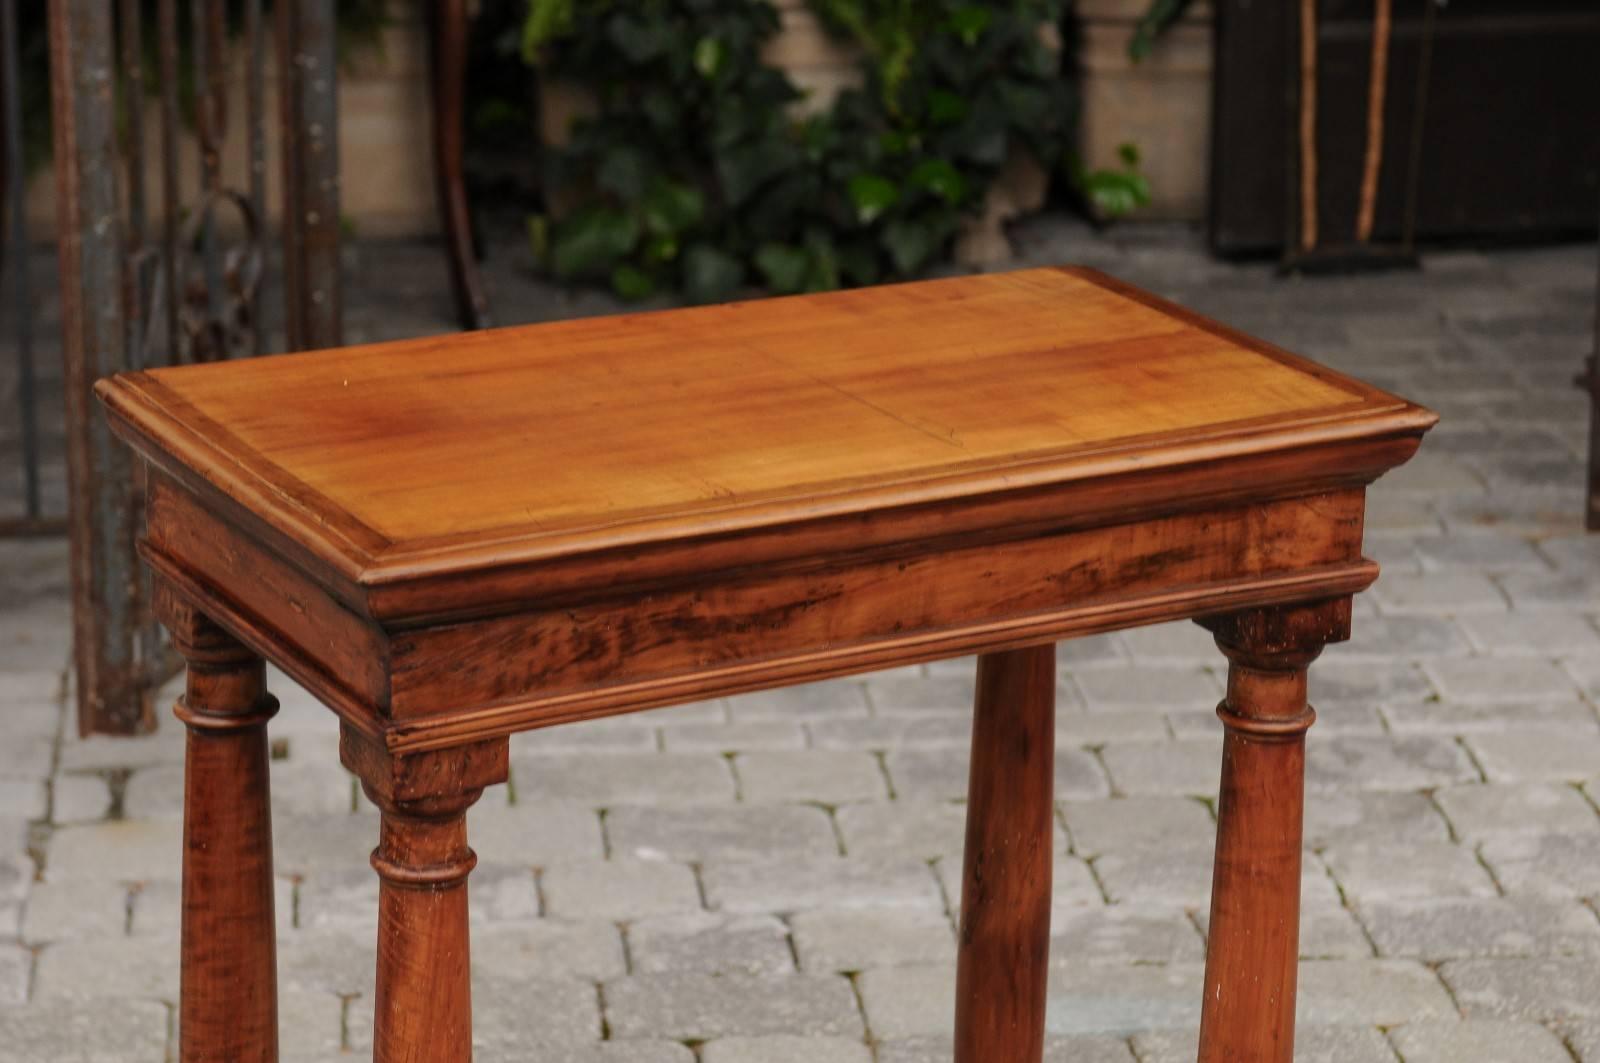 French Empire Style Mid-19th Century Fruitwood Side Table with Doric Column Legs For Sale 1